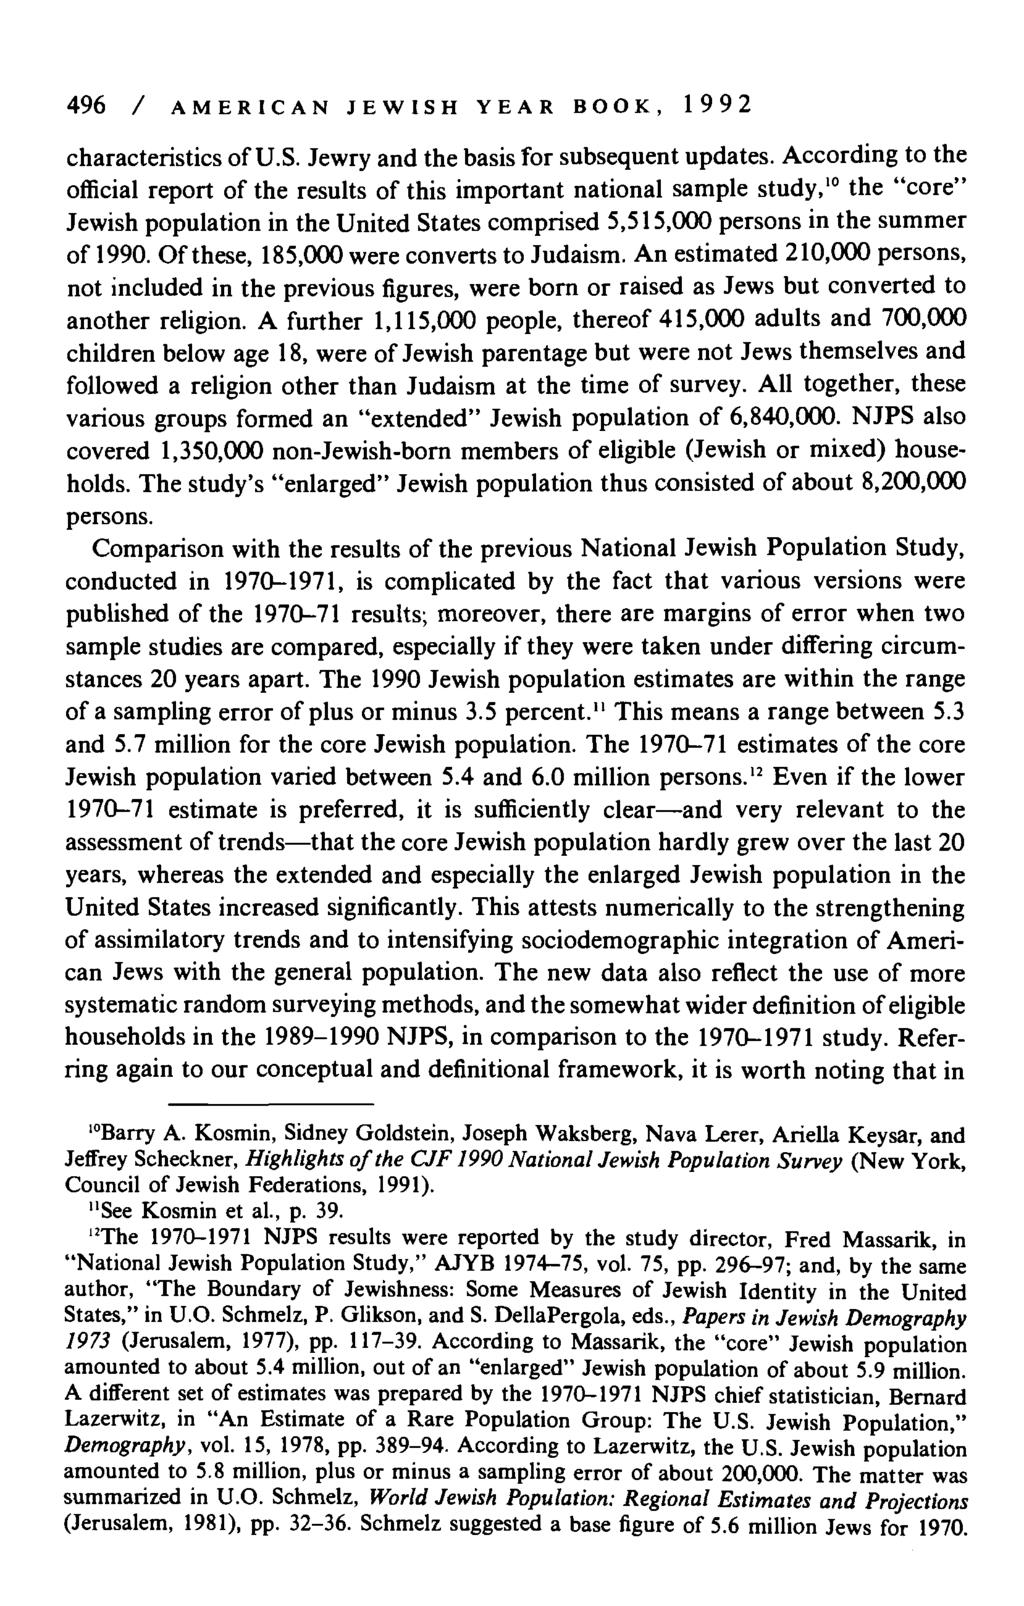 496 / AMERICAN JEWISH YEAR BOOK, 1992 characteristics of U.S. Jewry and the basis for subsequent updates.